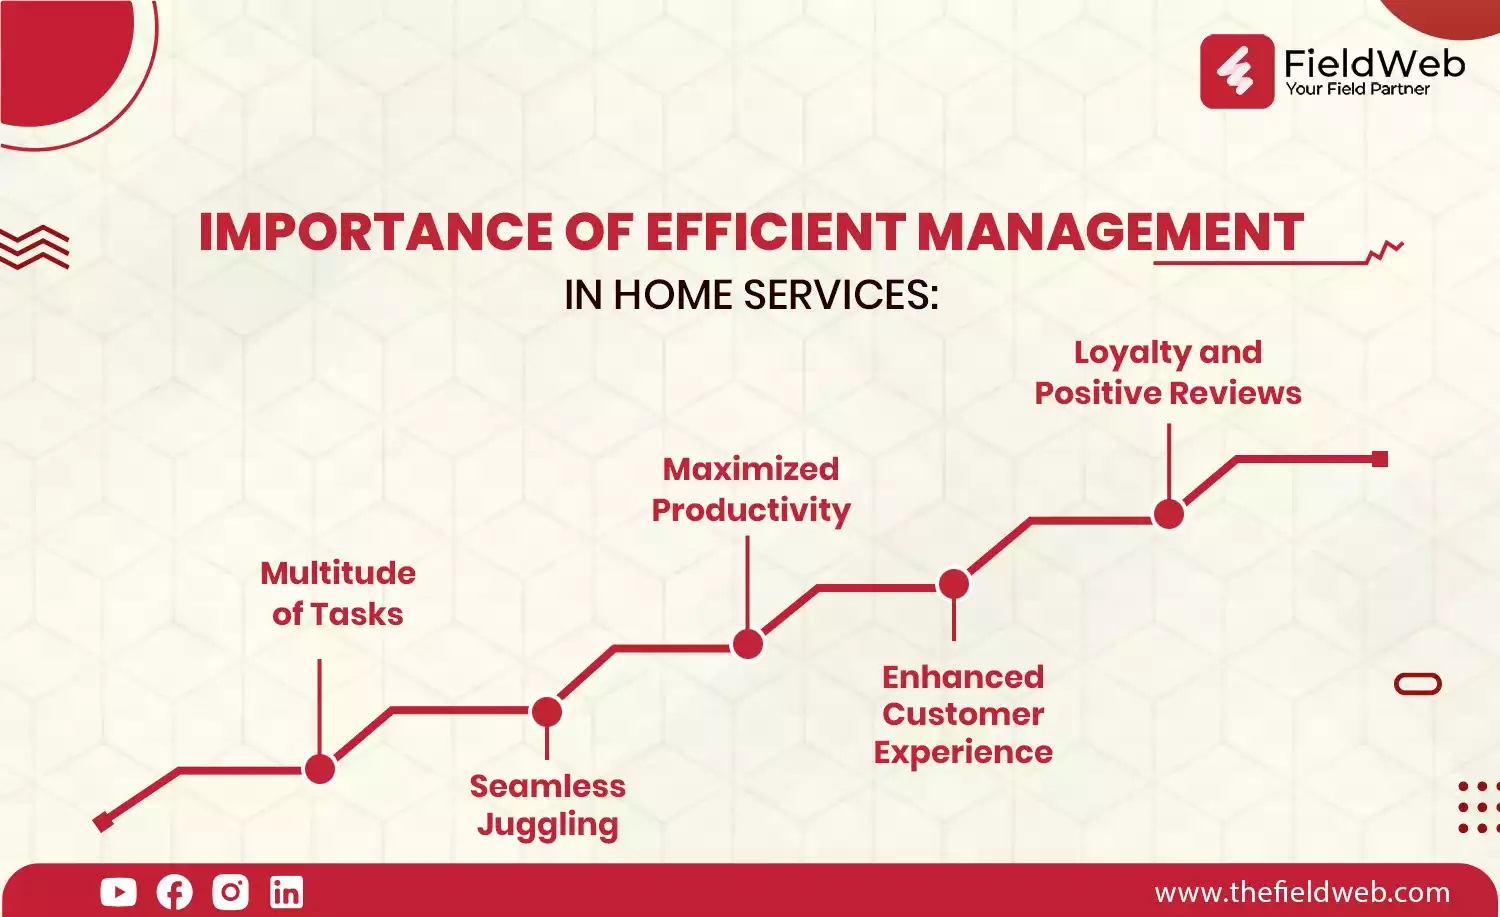 image is displaying 5 importance of efficient management with a draw line